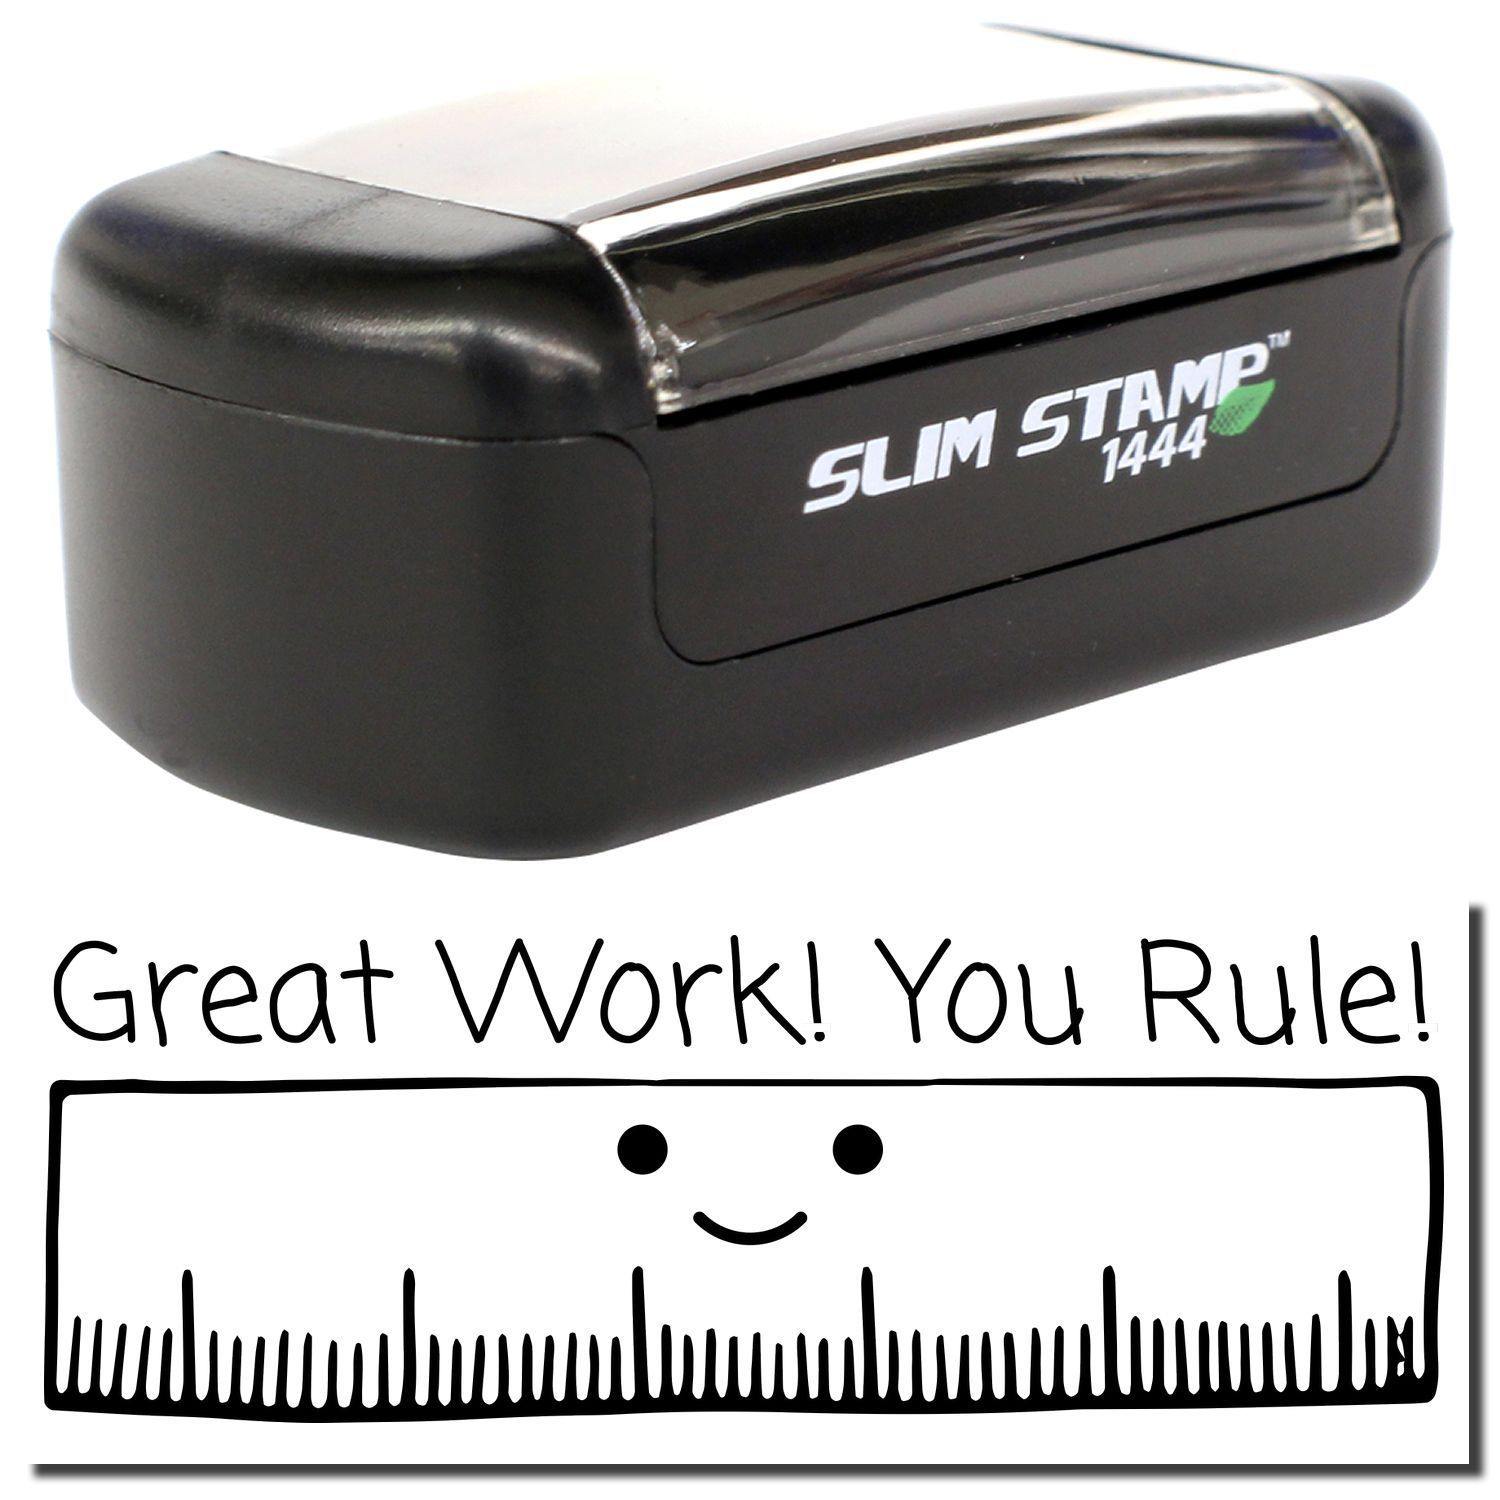 A stock office pre-inked stamp with a stamped image showing how the text "Great Work! You Rule!" with a large image of a ruler with a smiling face is displayed after stamping.